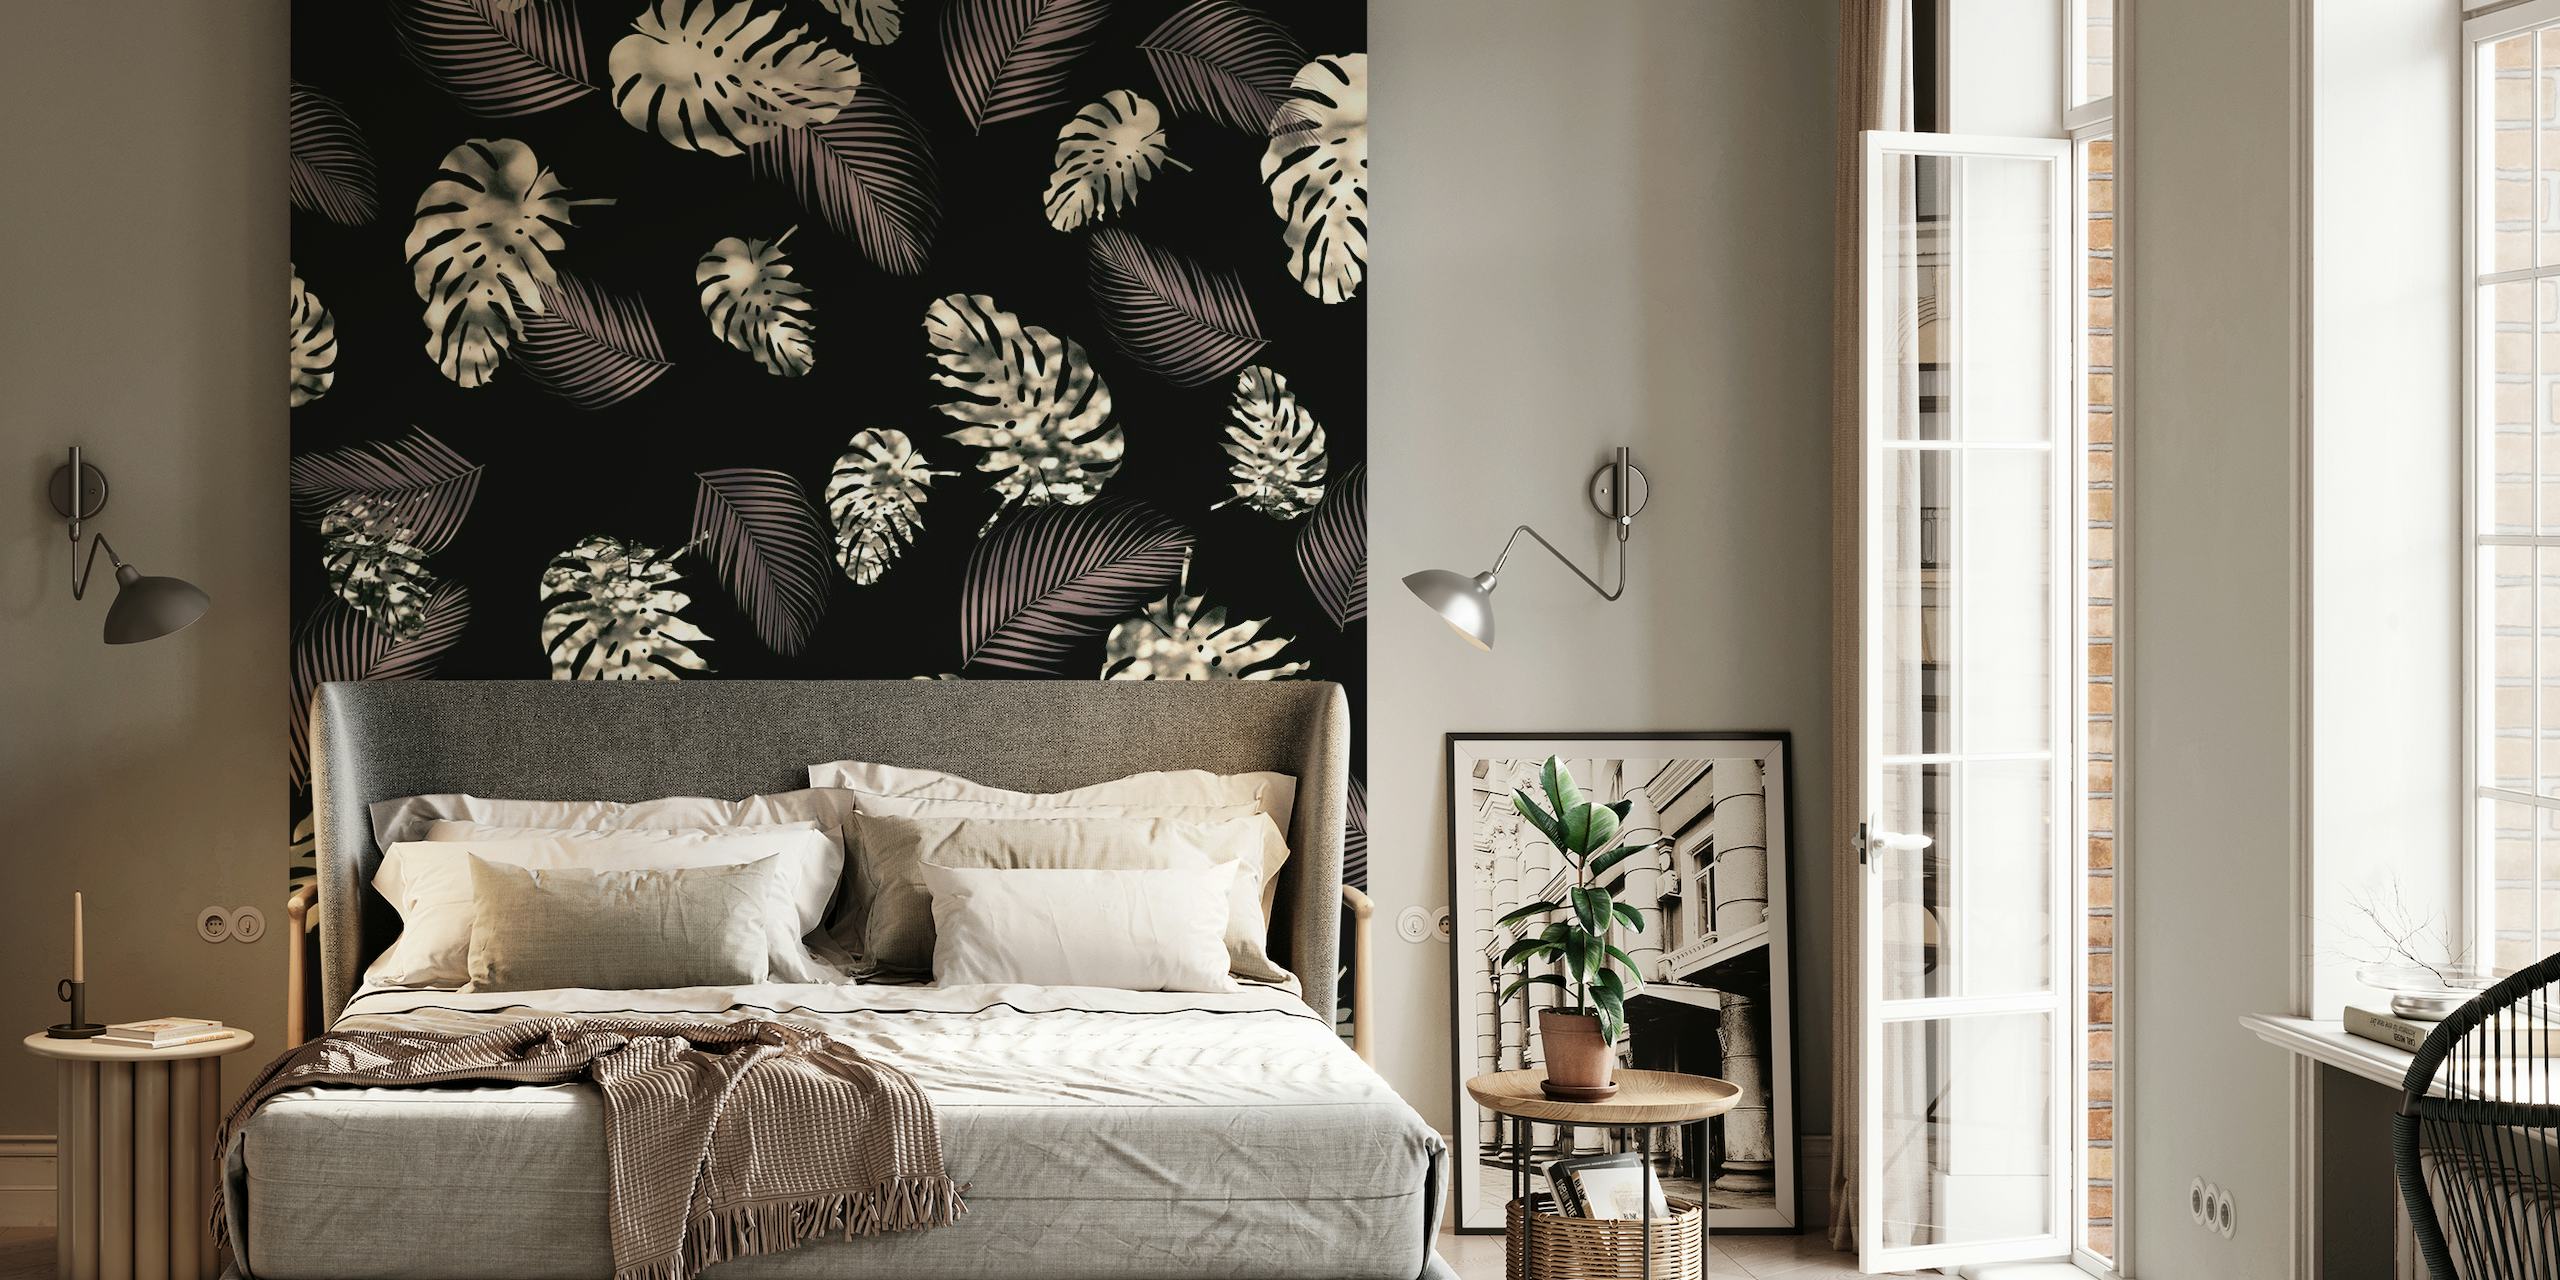 Tropical Monstera leaves pattern wall mural on a black background